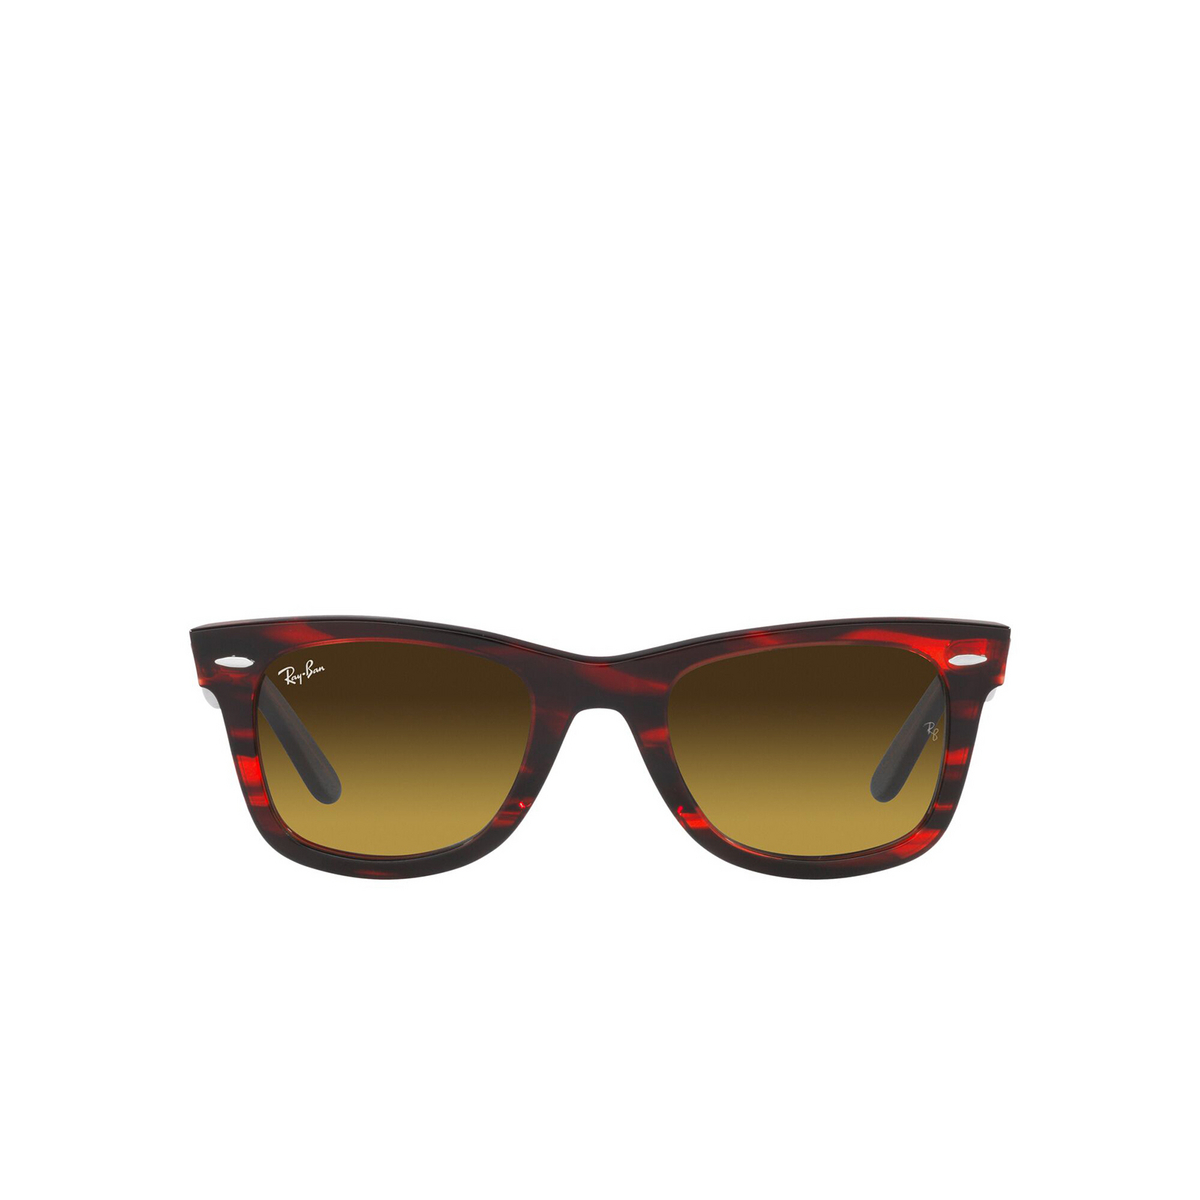 Ray-Ban WAYFARER Sunglasses 136285 Striped Red - front view